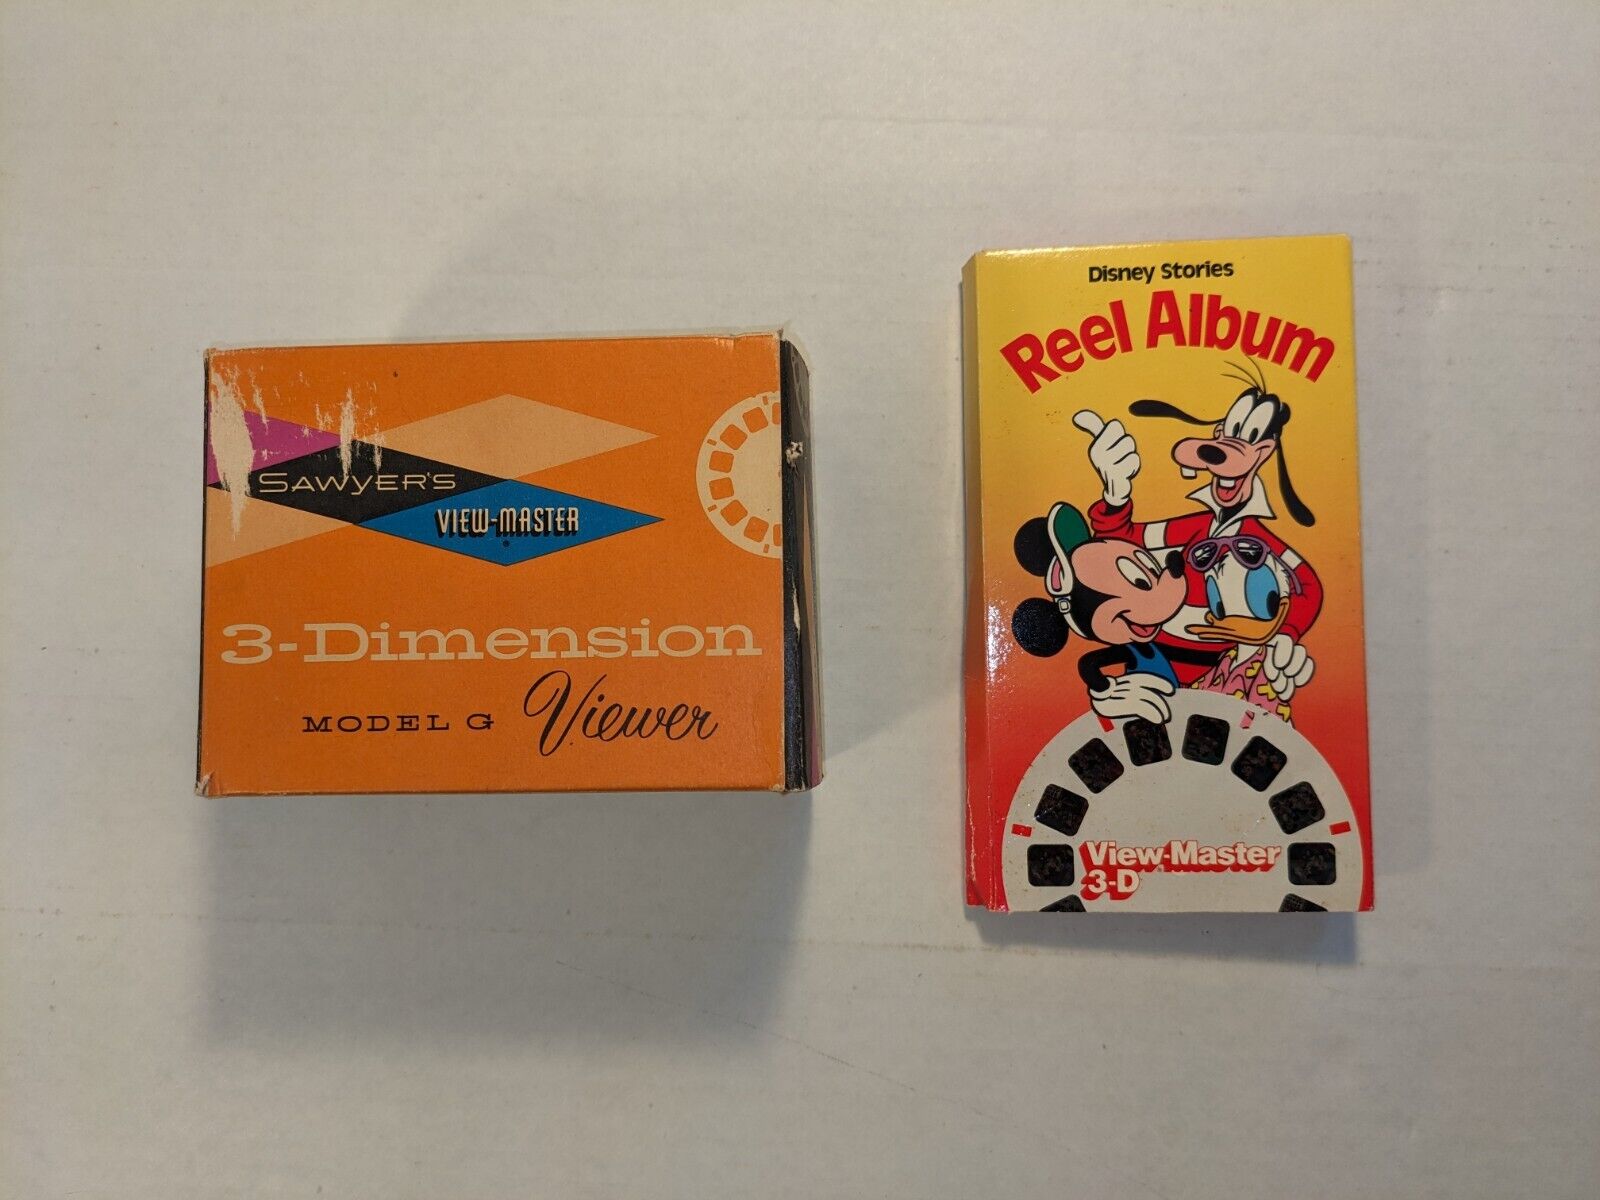 Vintage Sawyer View-Master Model G in box Stereo Viewer with 18 Disney reels